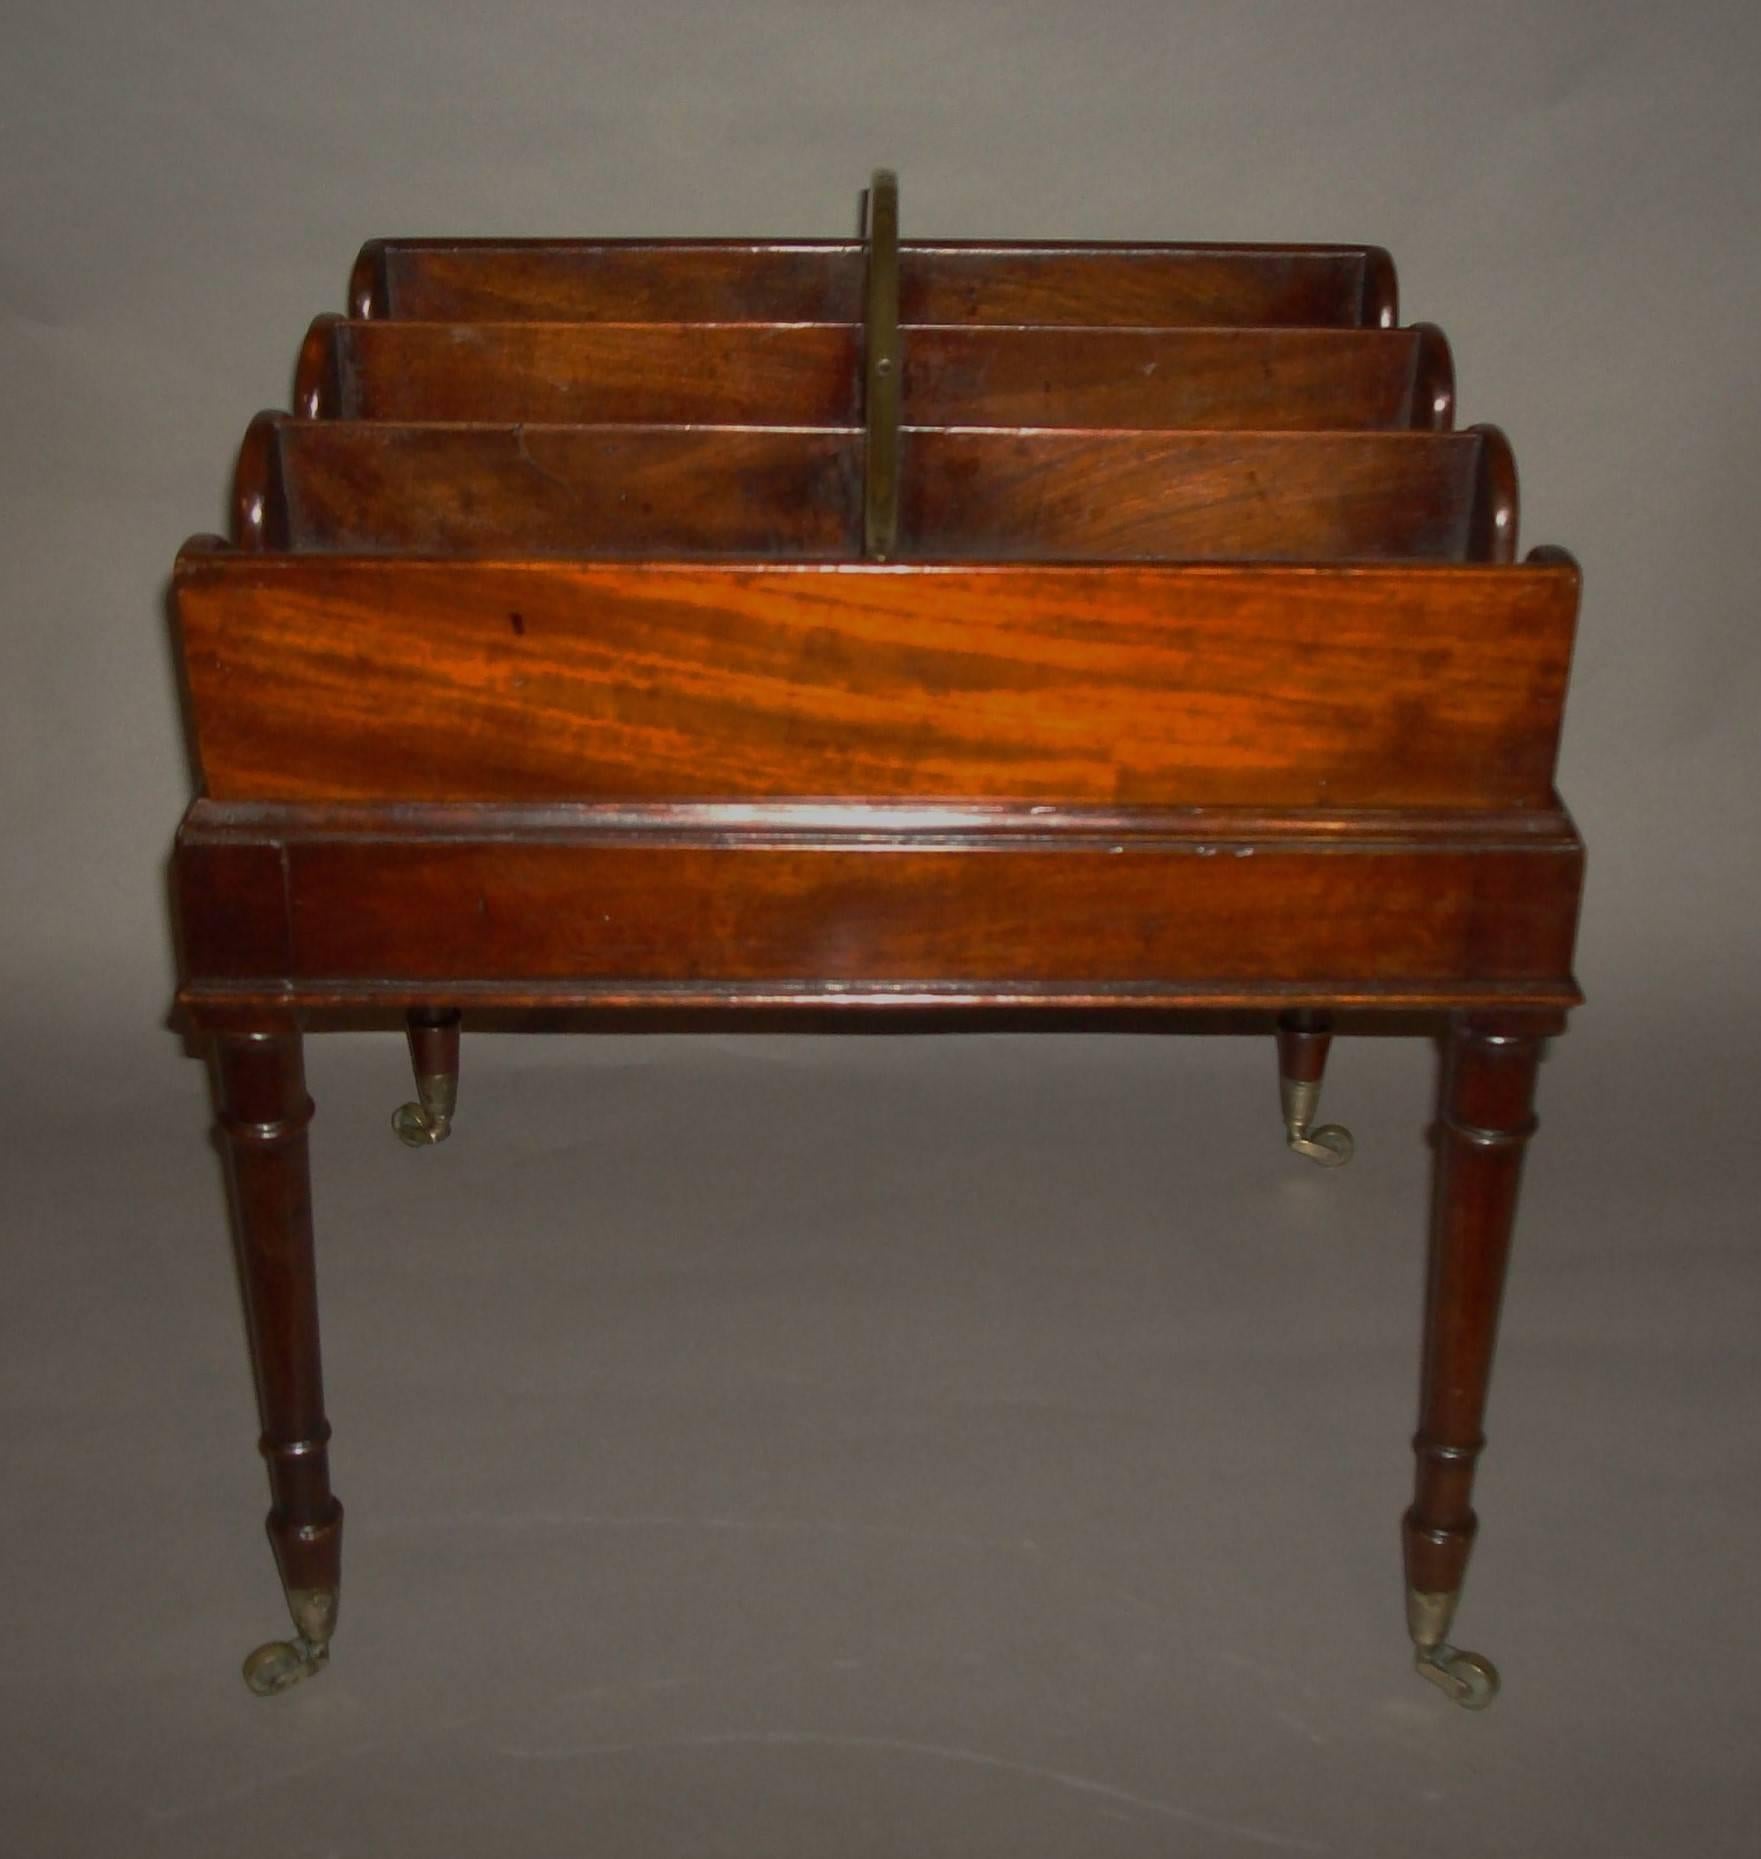 Late 18th Century Unusual George III Mahogany Bottle Carrier on Stand